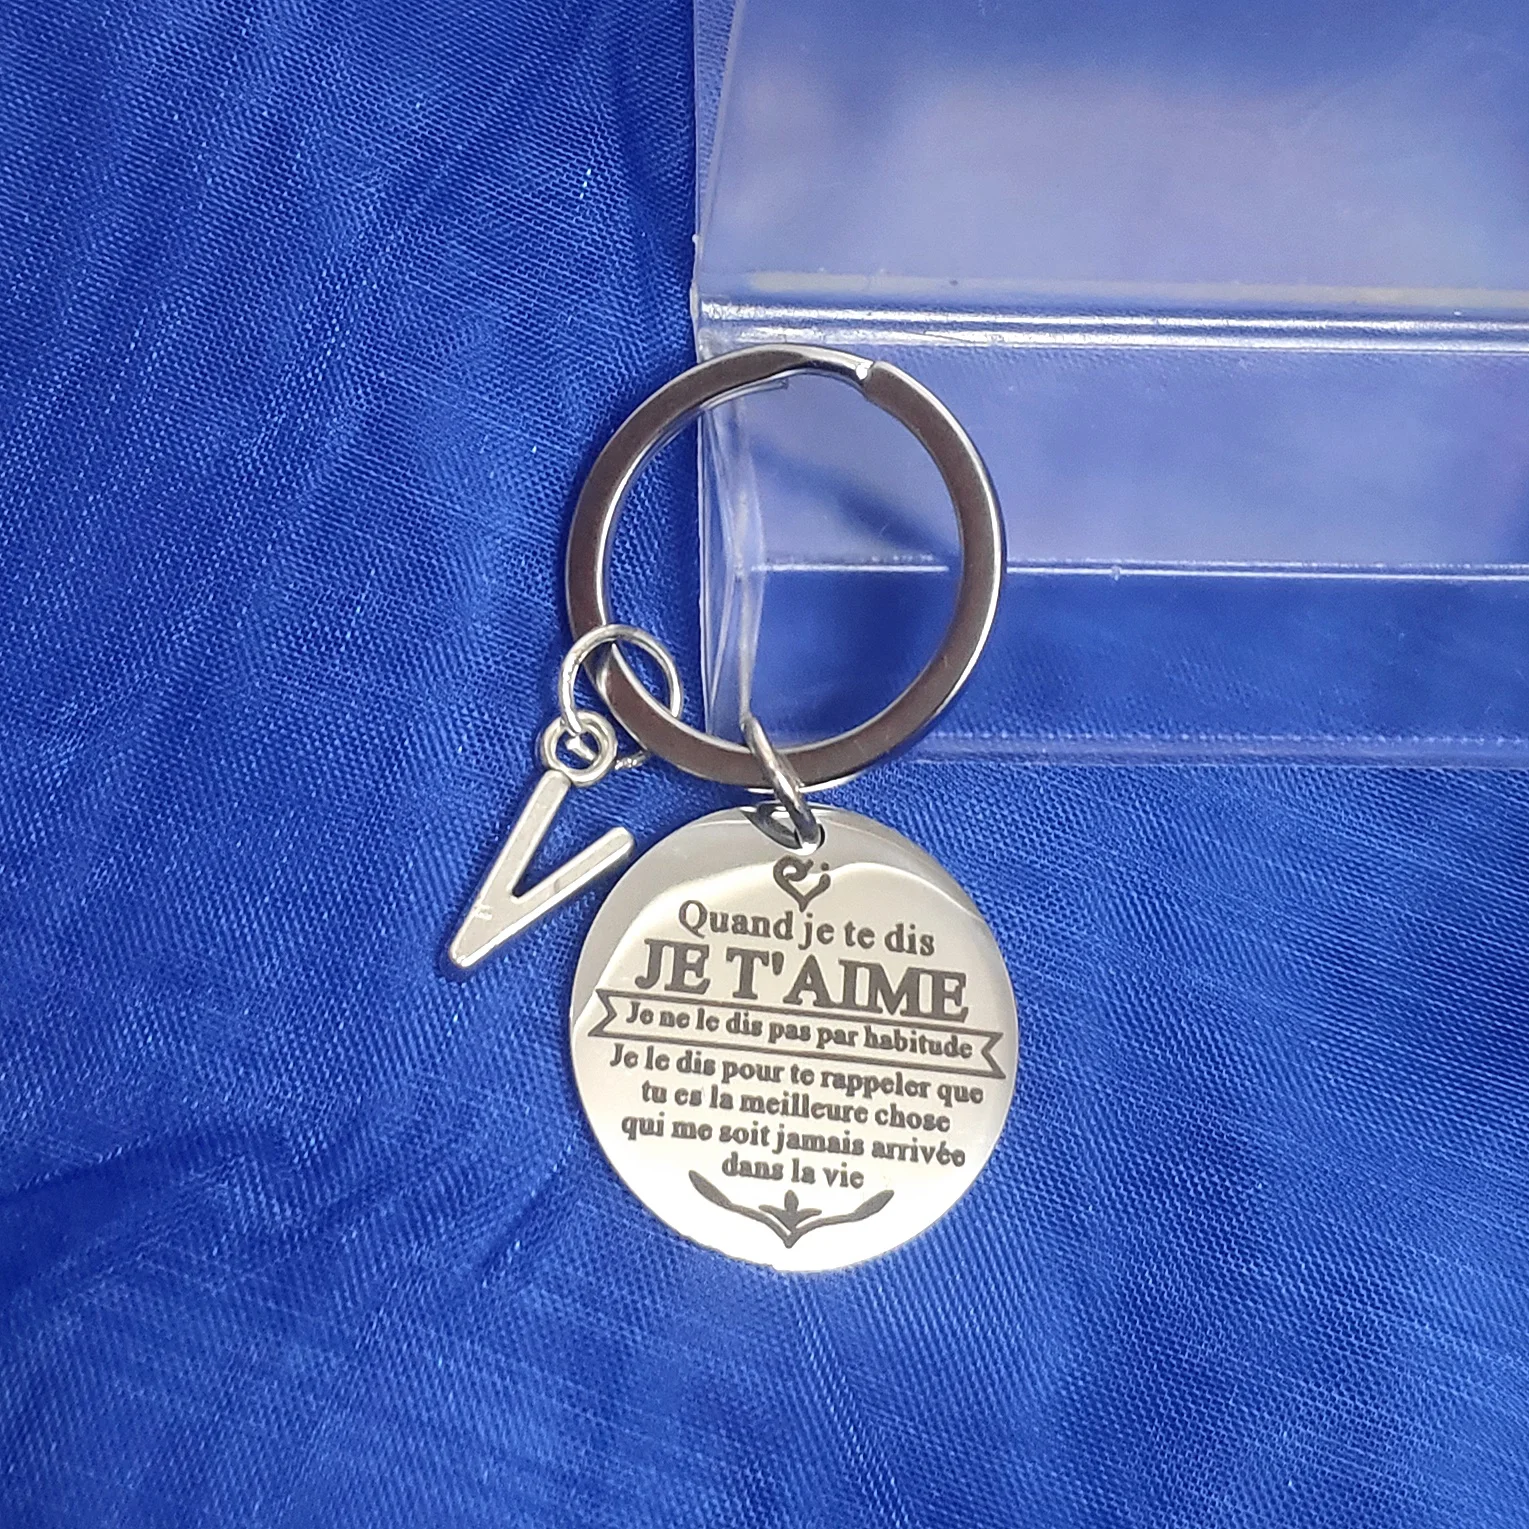 

Best Friend Quand Je Te Dis JE T'AIME Ornaments Stainless Steel Keyring Gift Lanyard for Keys Graduation Metal Letters Birthday